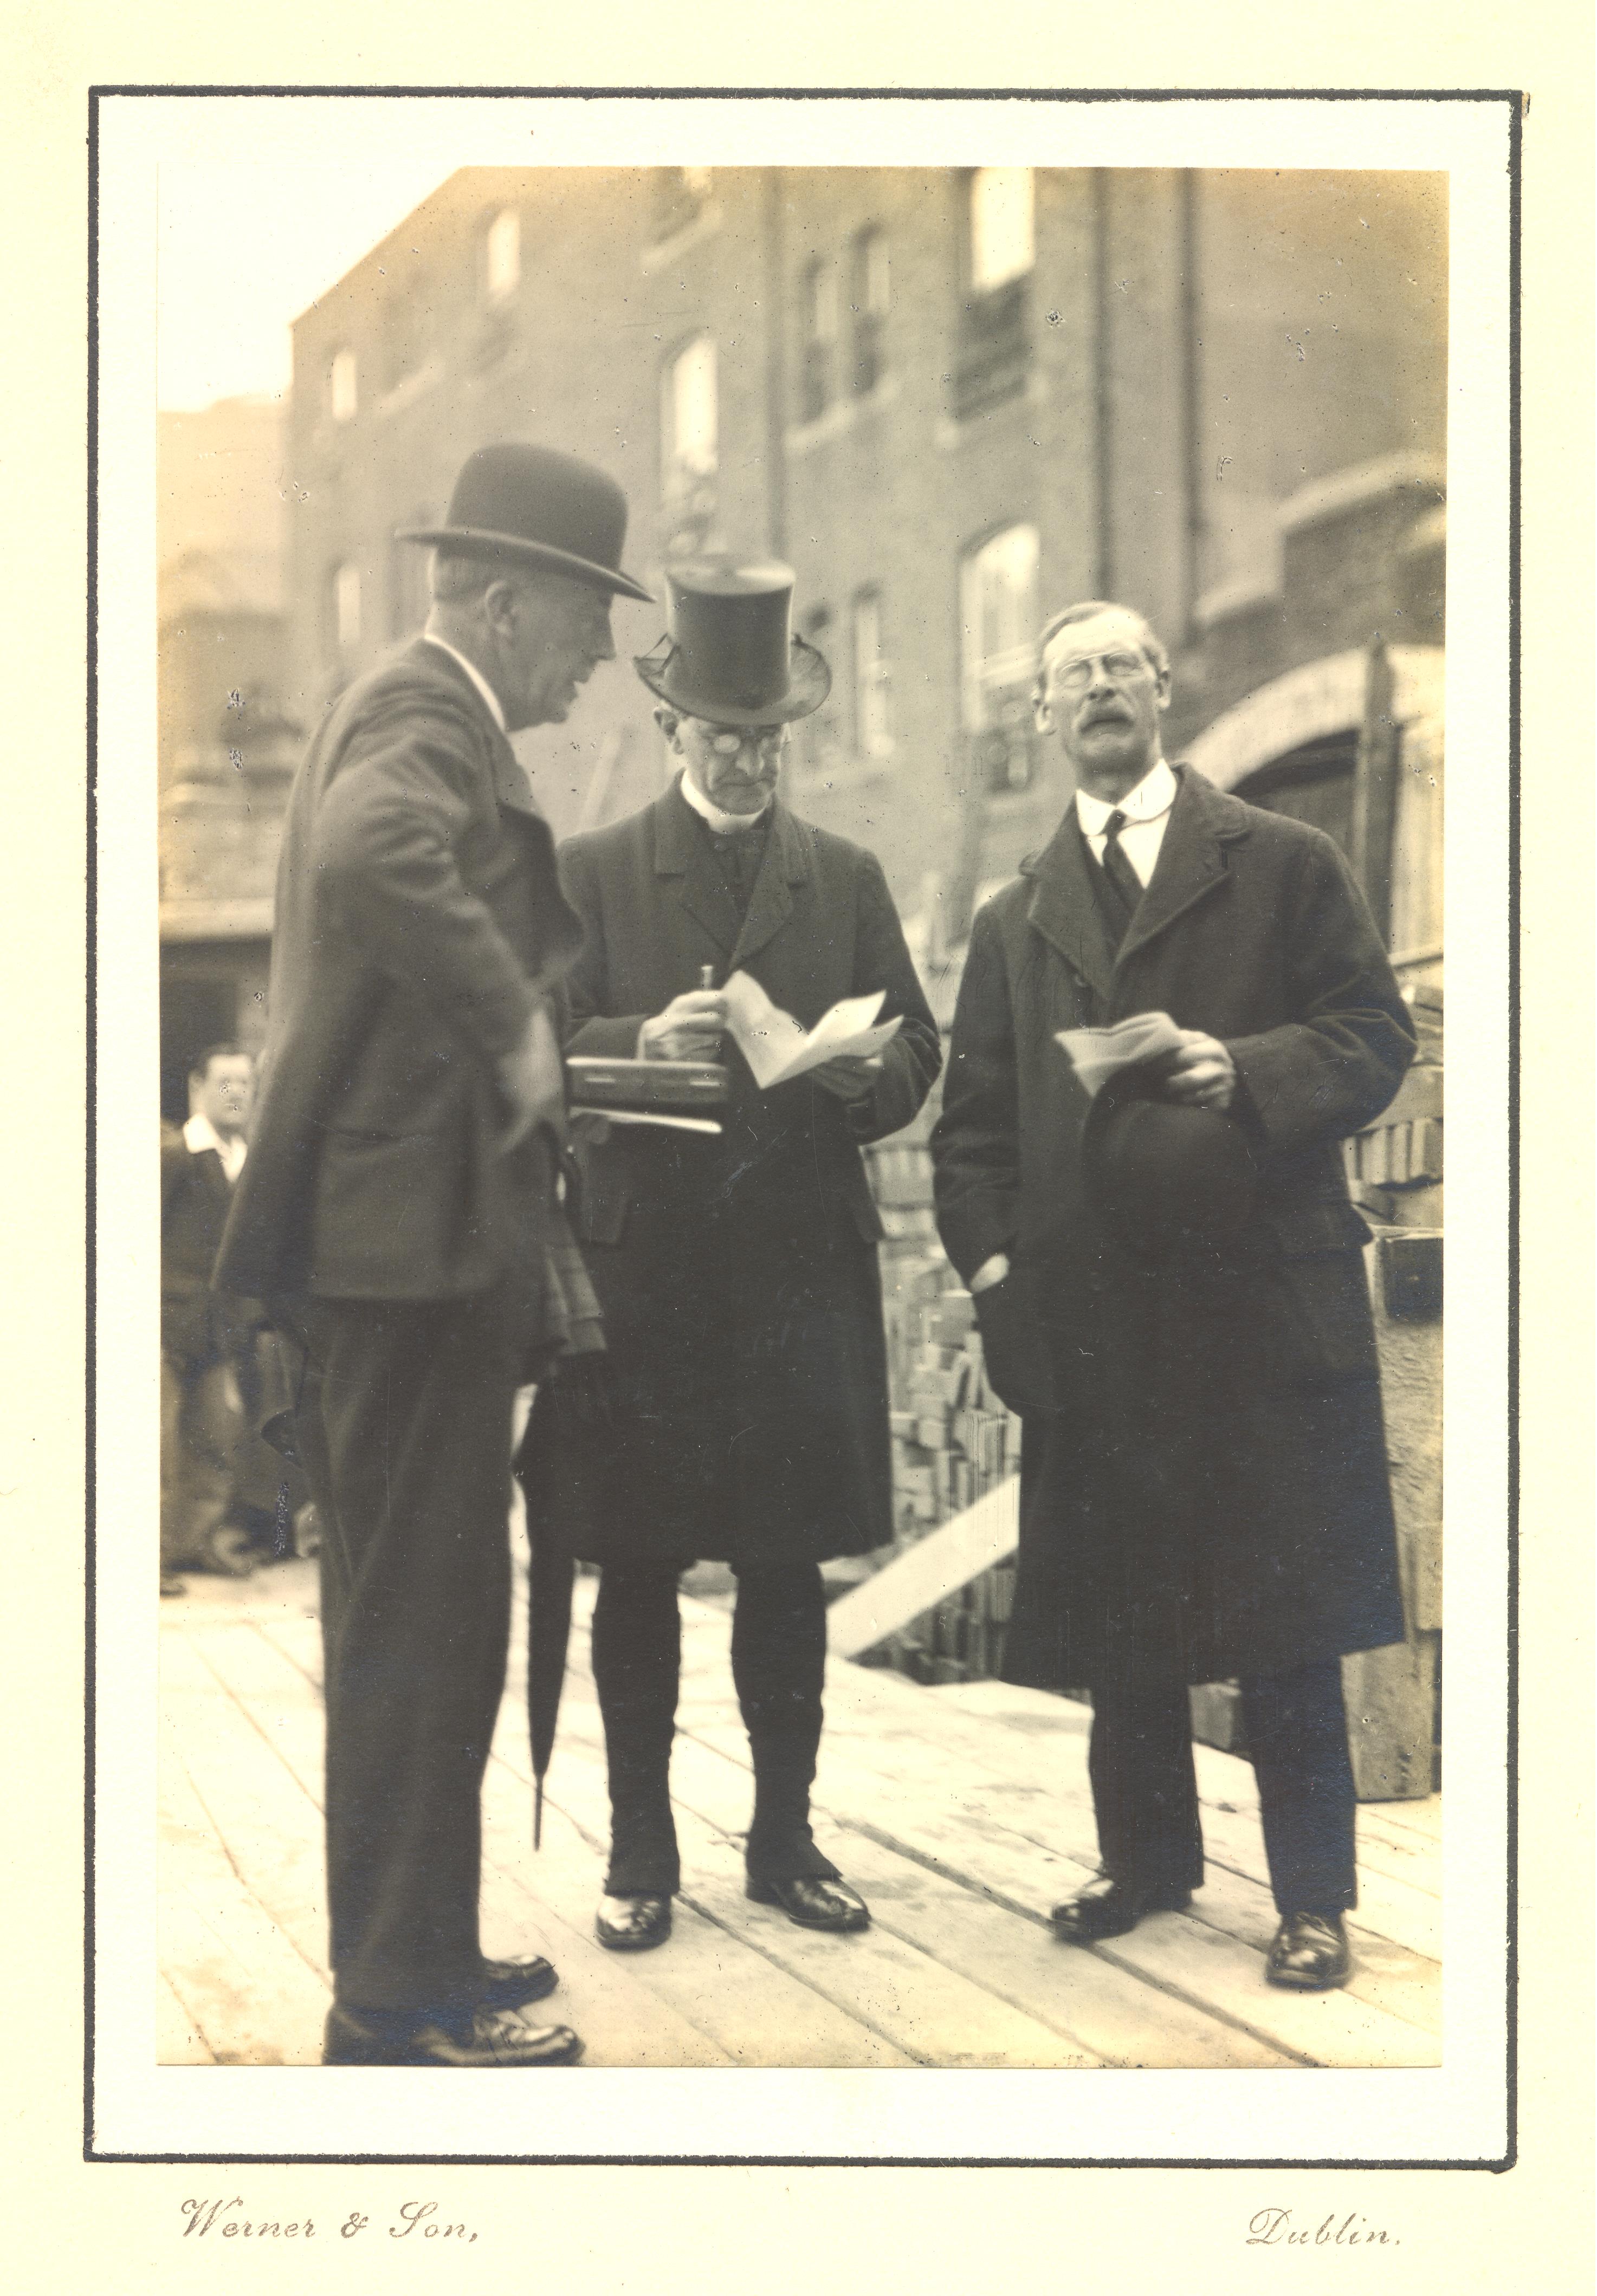 Although there is no written identification of the individuals, it is likely that this shows the architect, Frederick Hicks on the far-right surveying the area where the new church will be built P.80.29.2